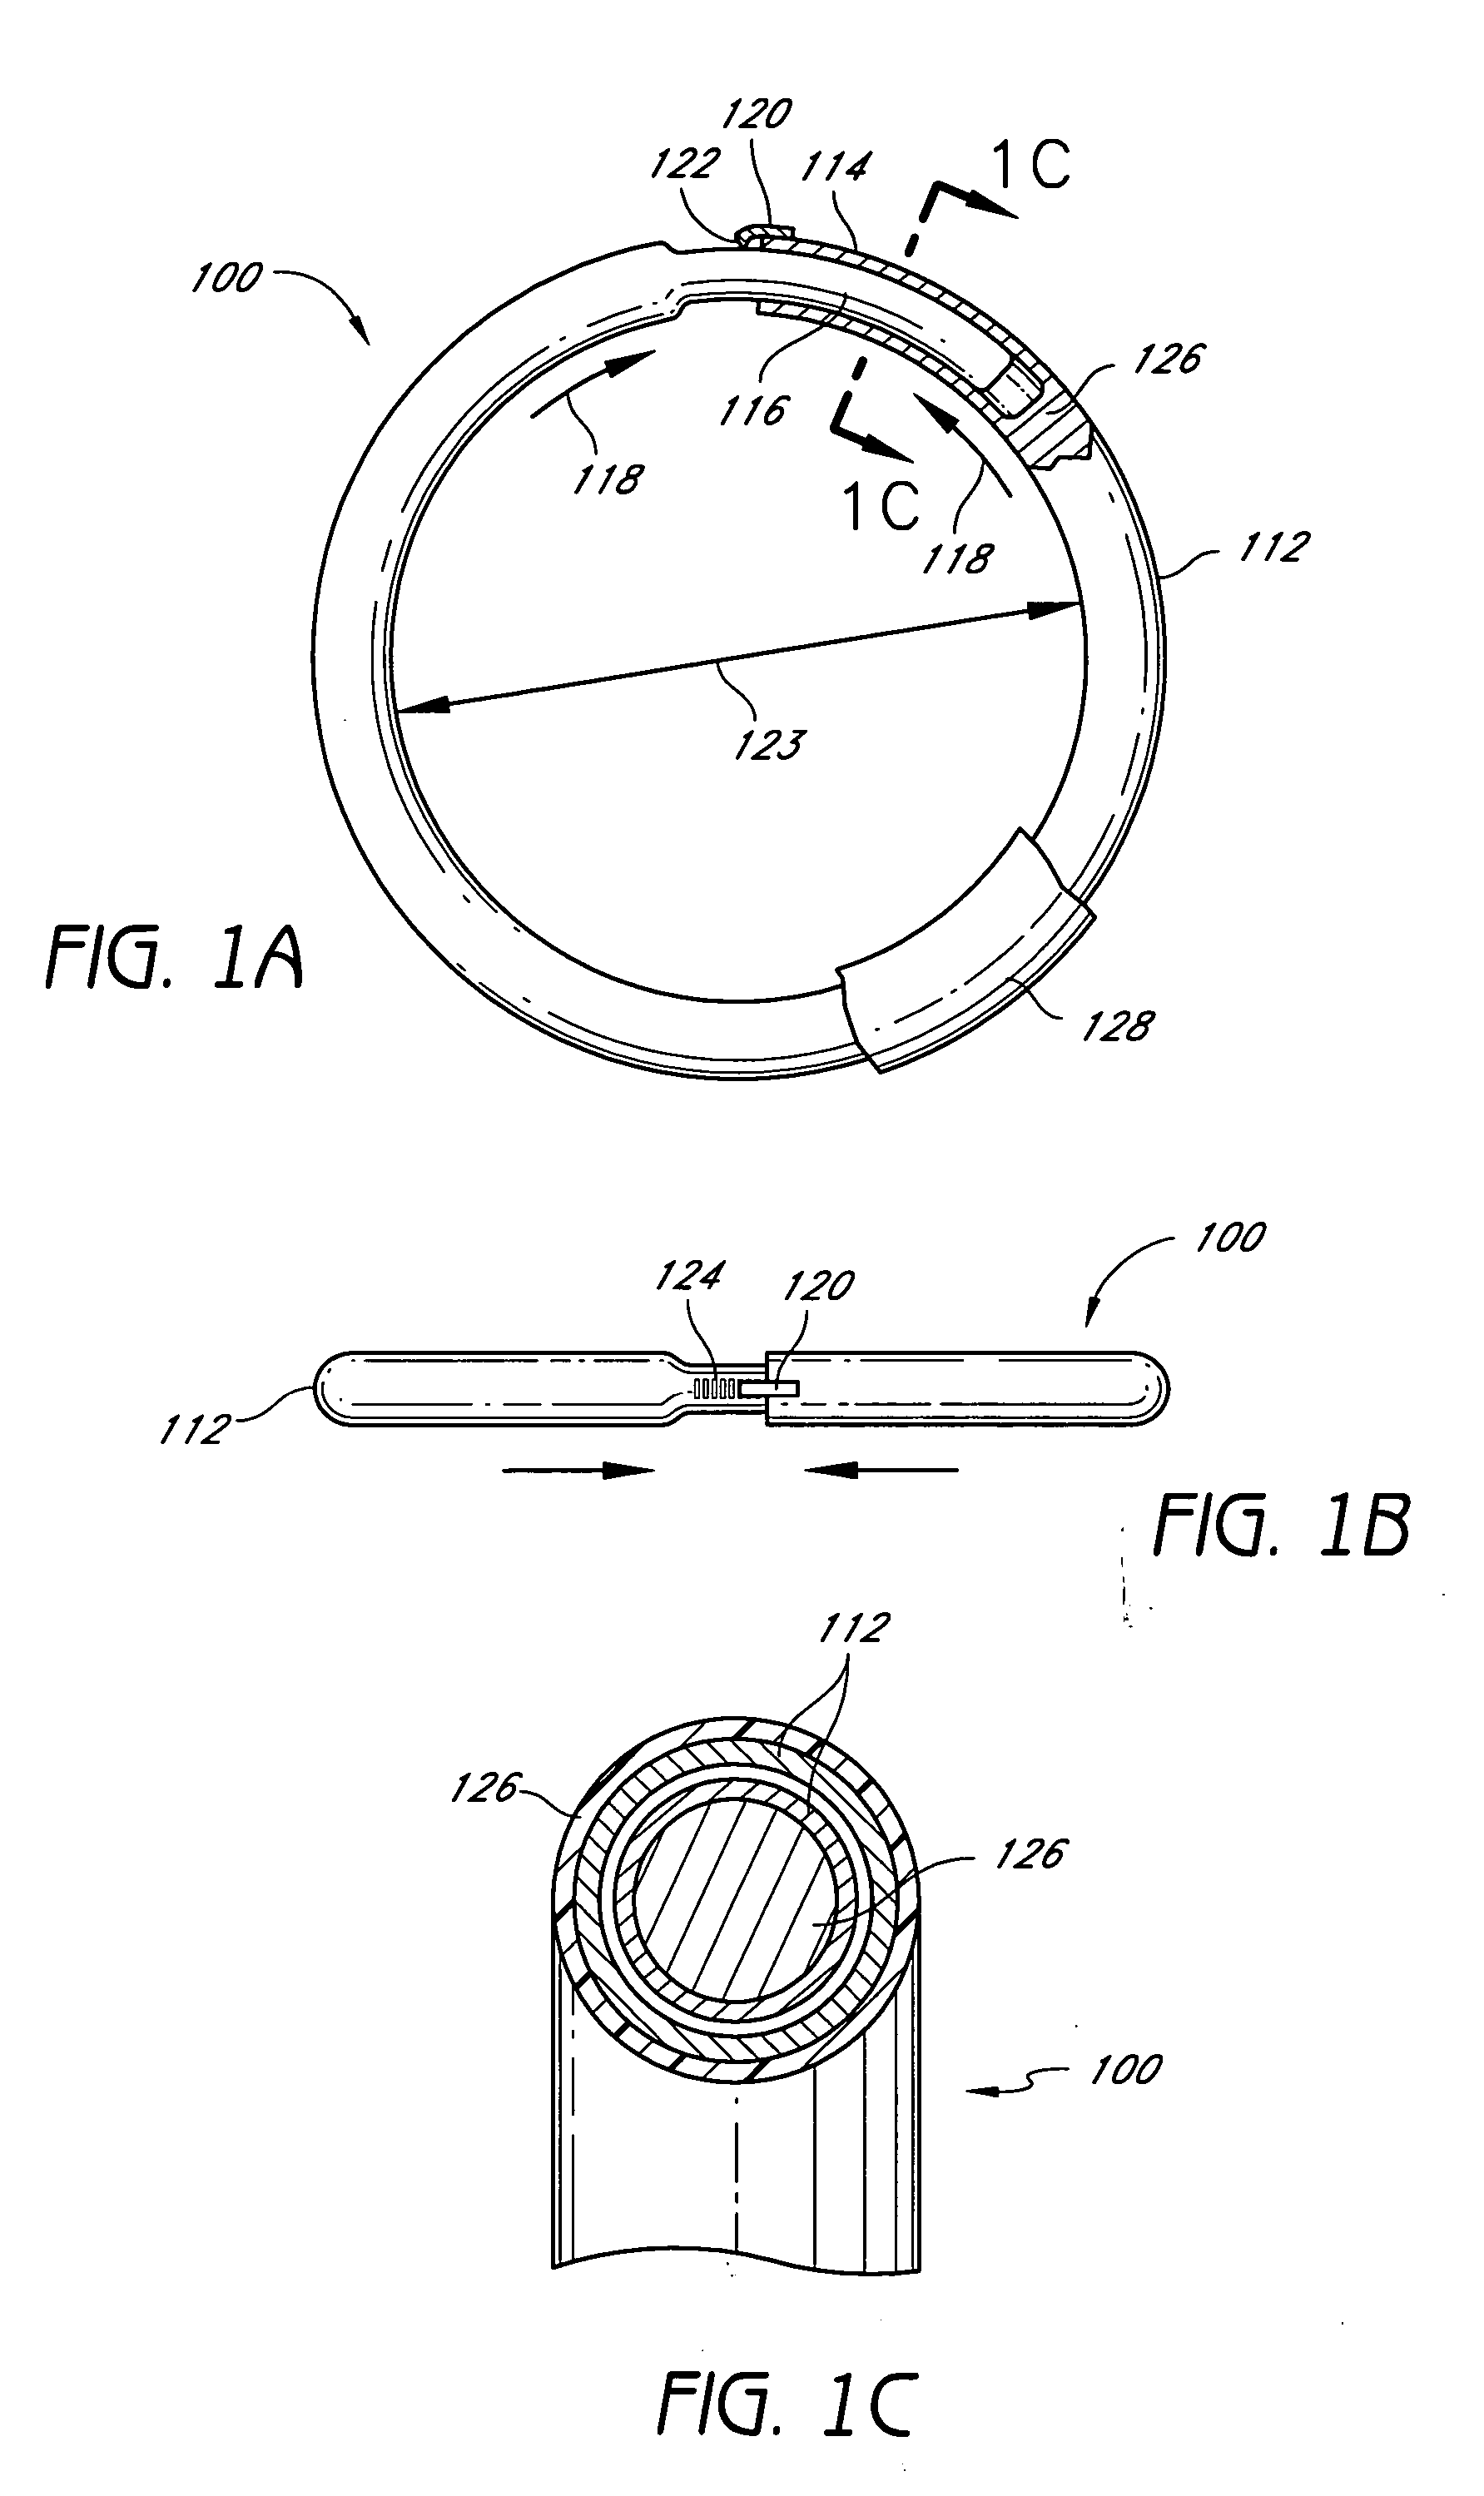 Methods for treating cardiac valves with adjustable implants